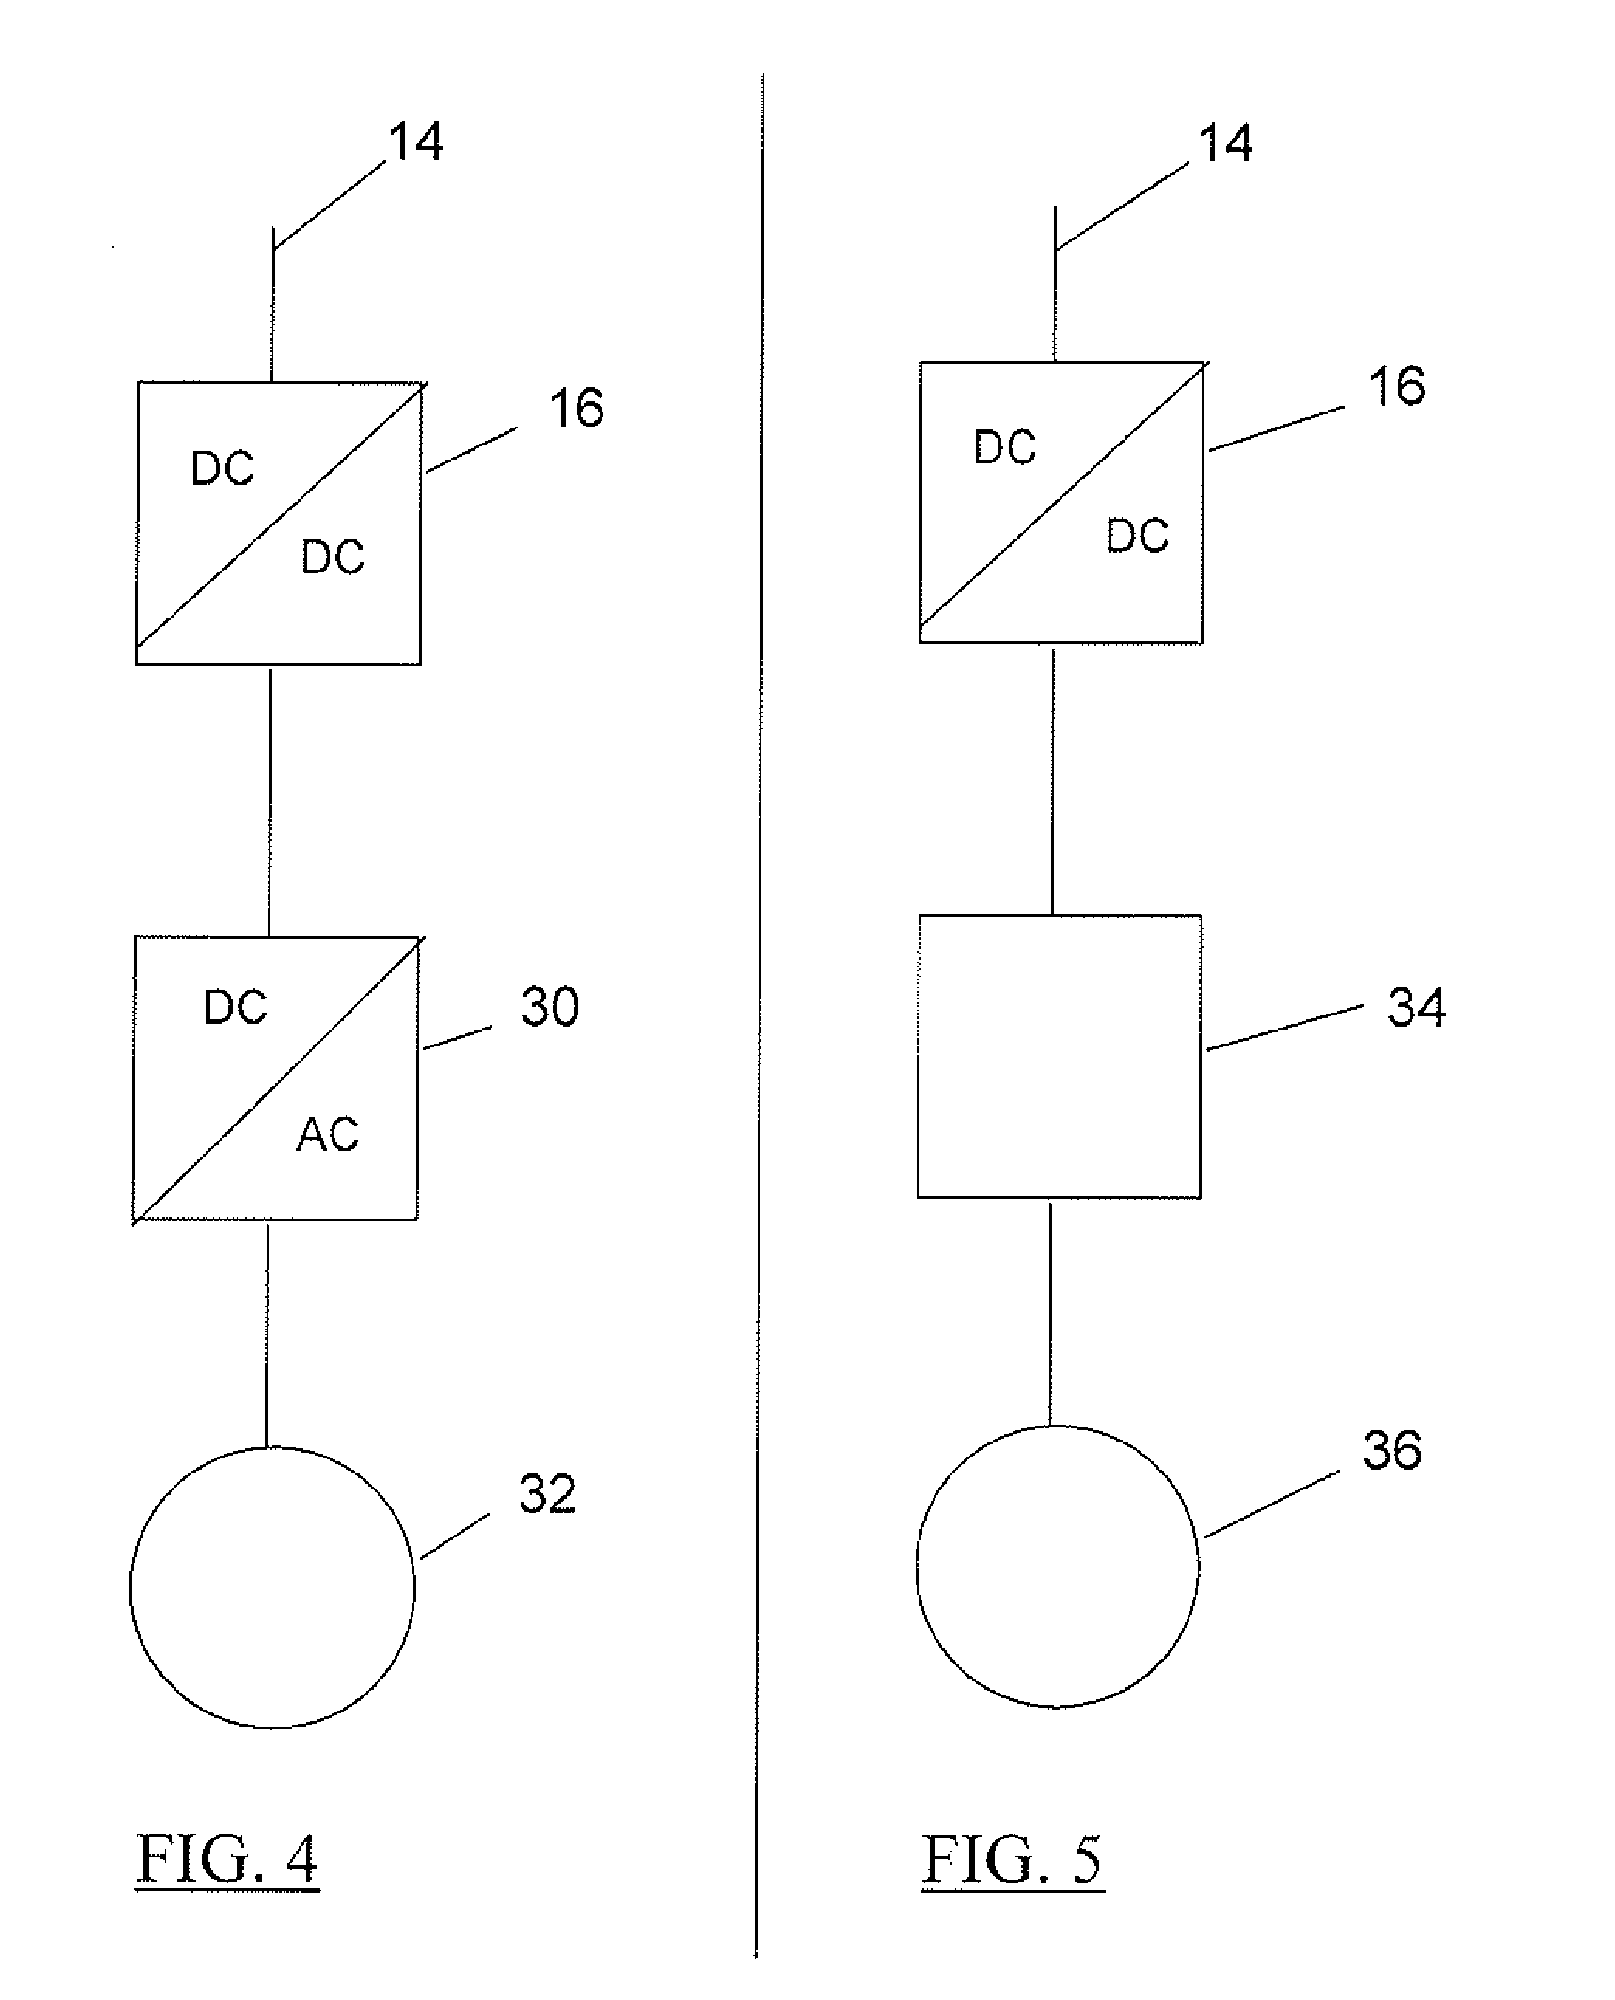 Power transmission system for use with downhole equipment